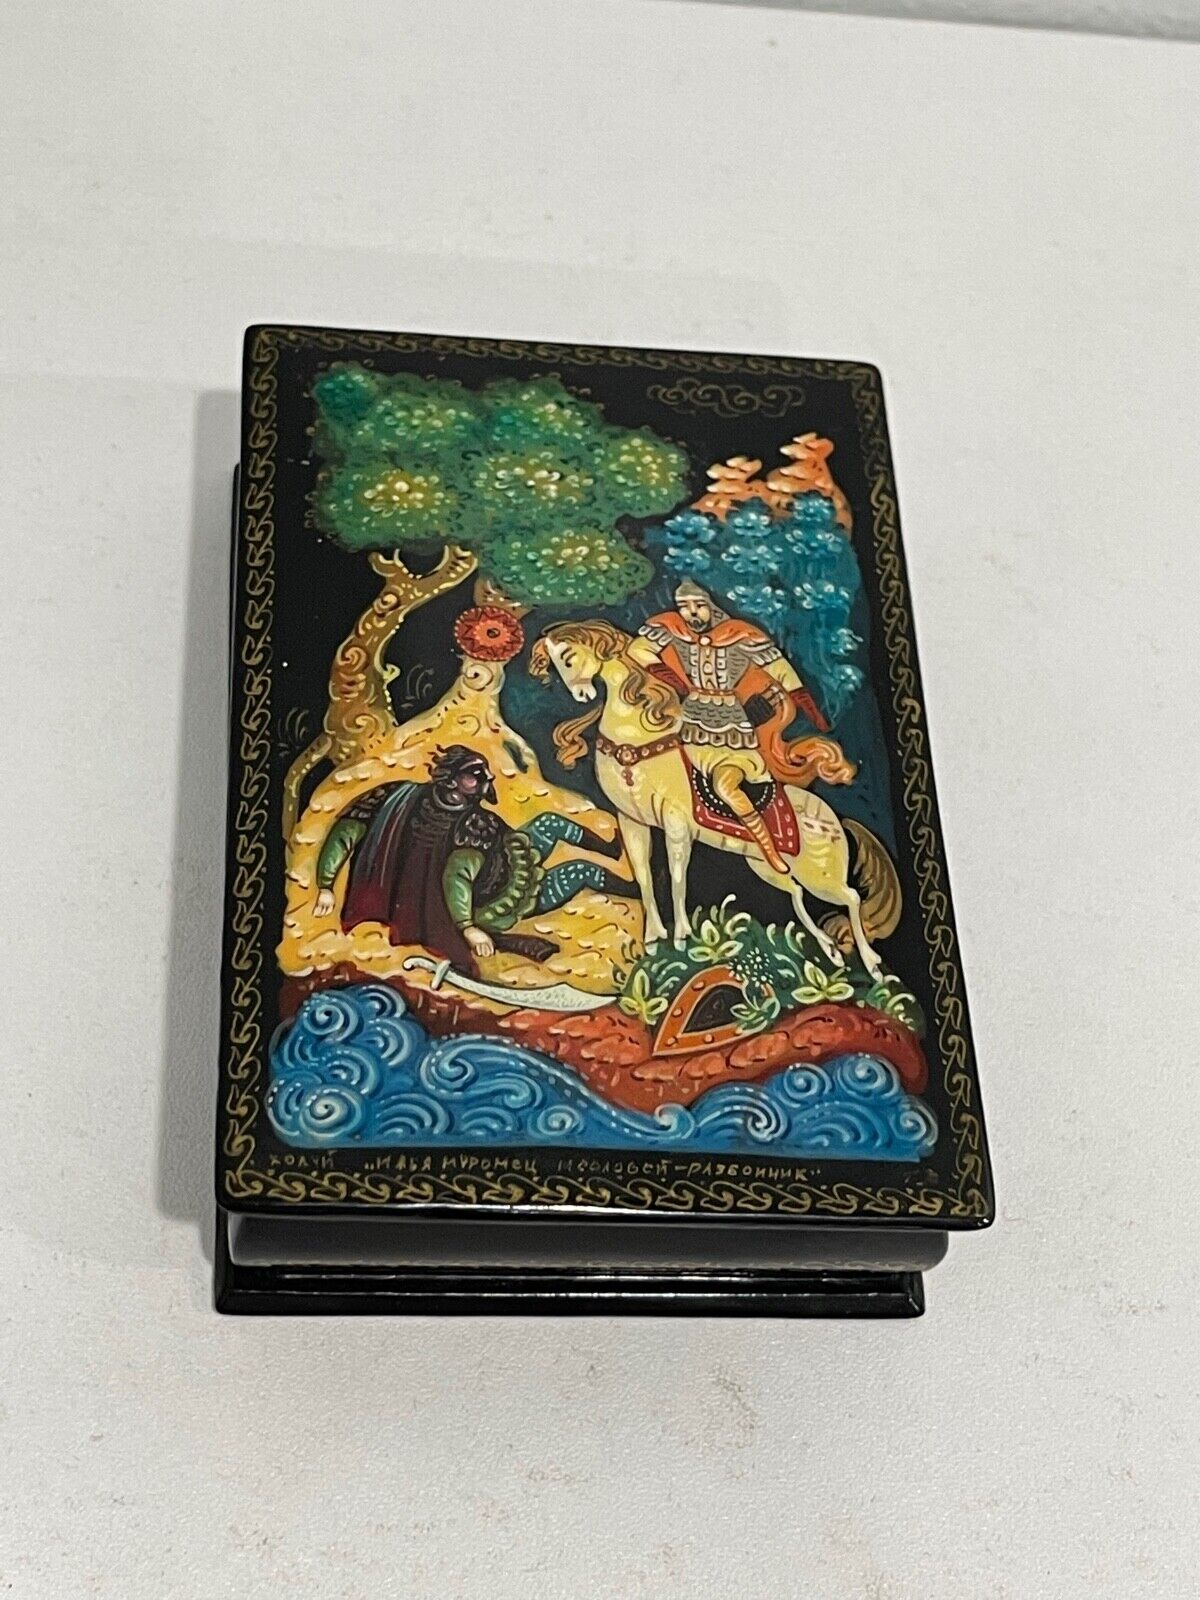 Vtg Russian Lacquer Signed Fairytale Box Ilya Muromets & Nightingale the Robber